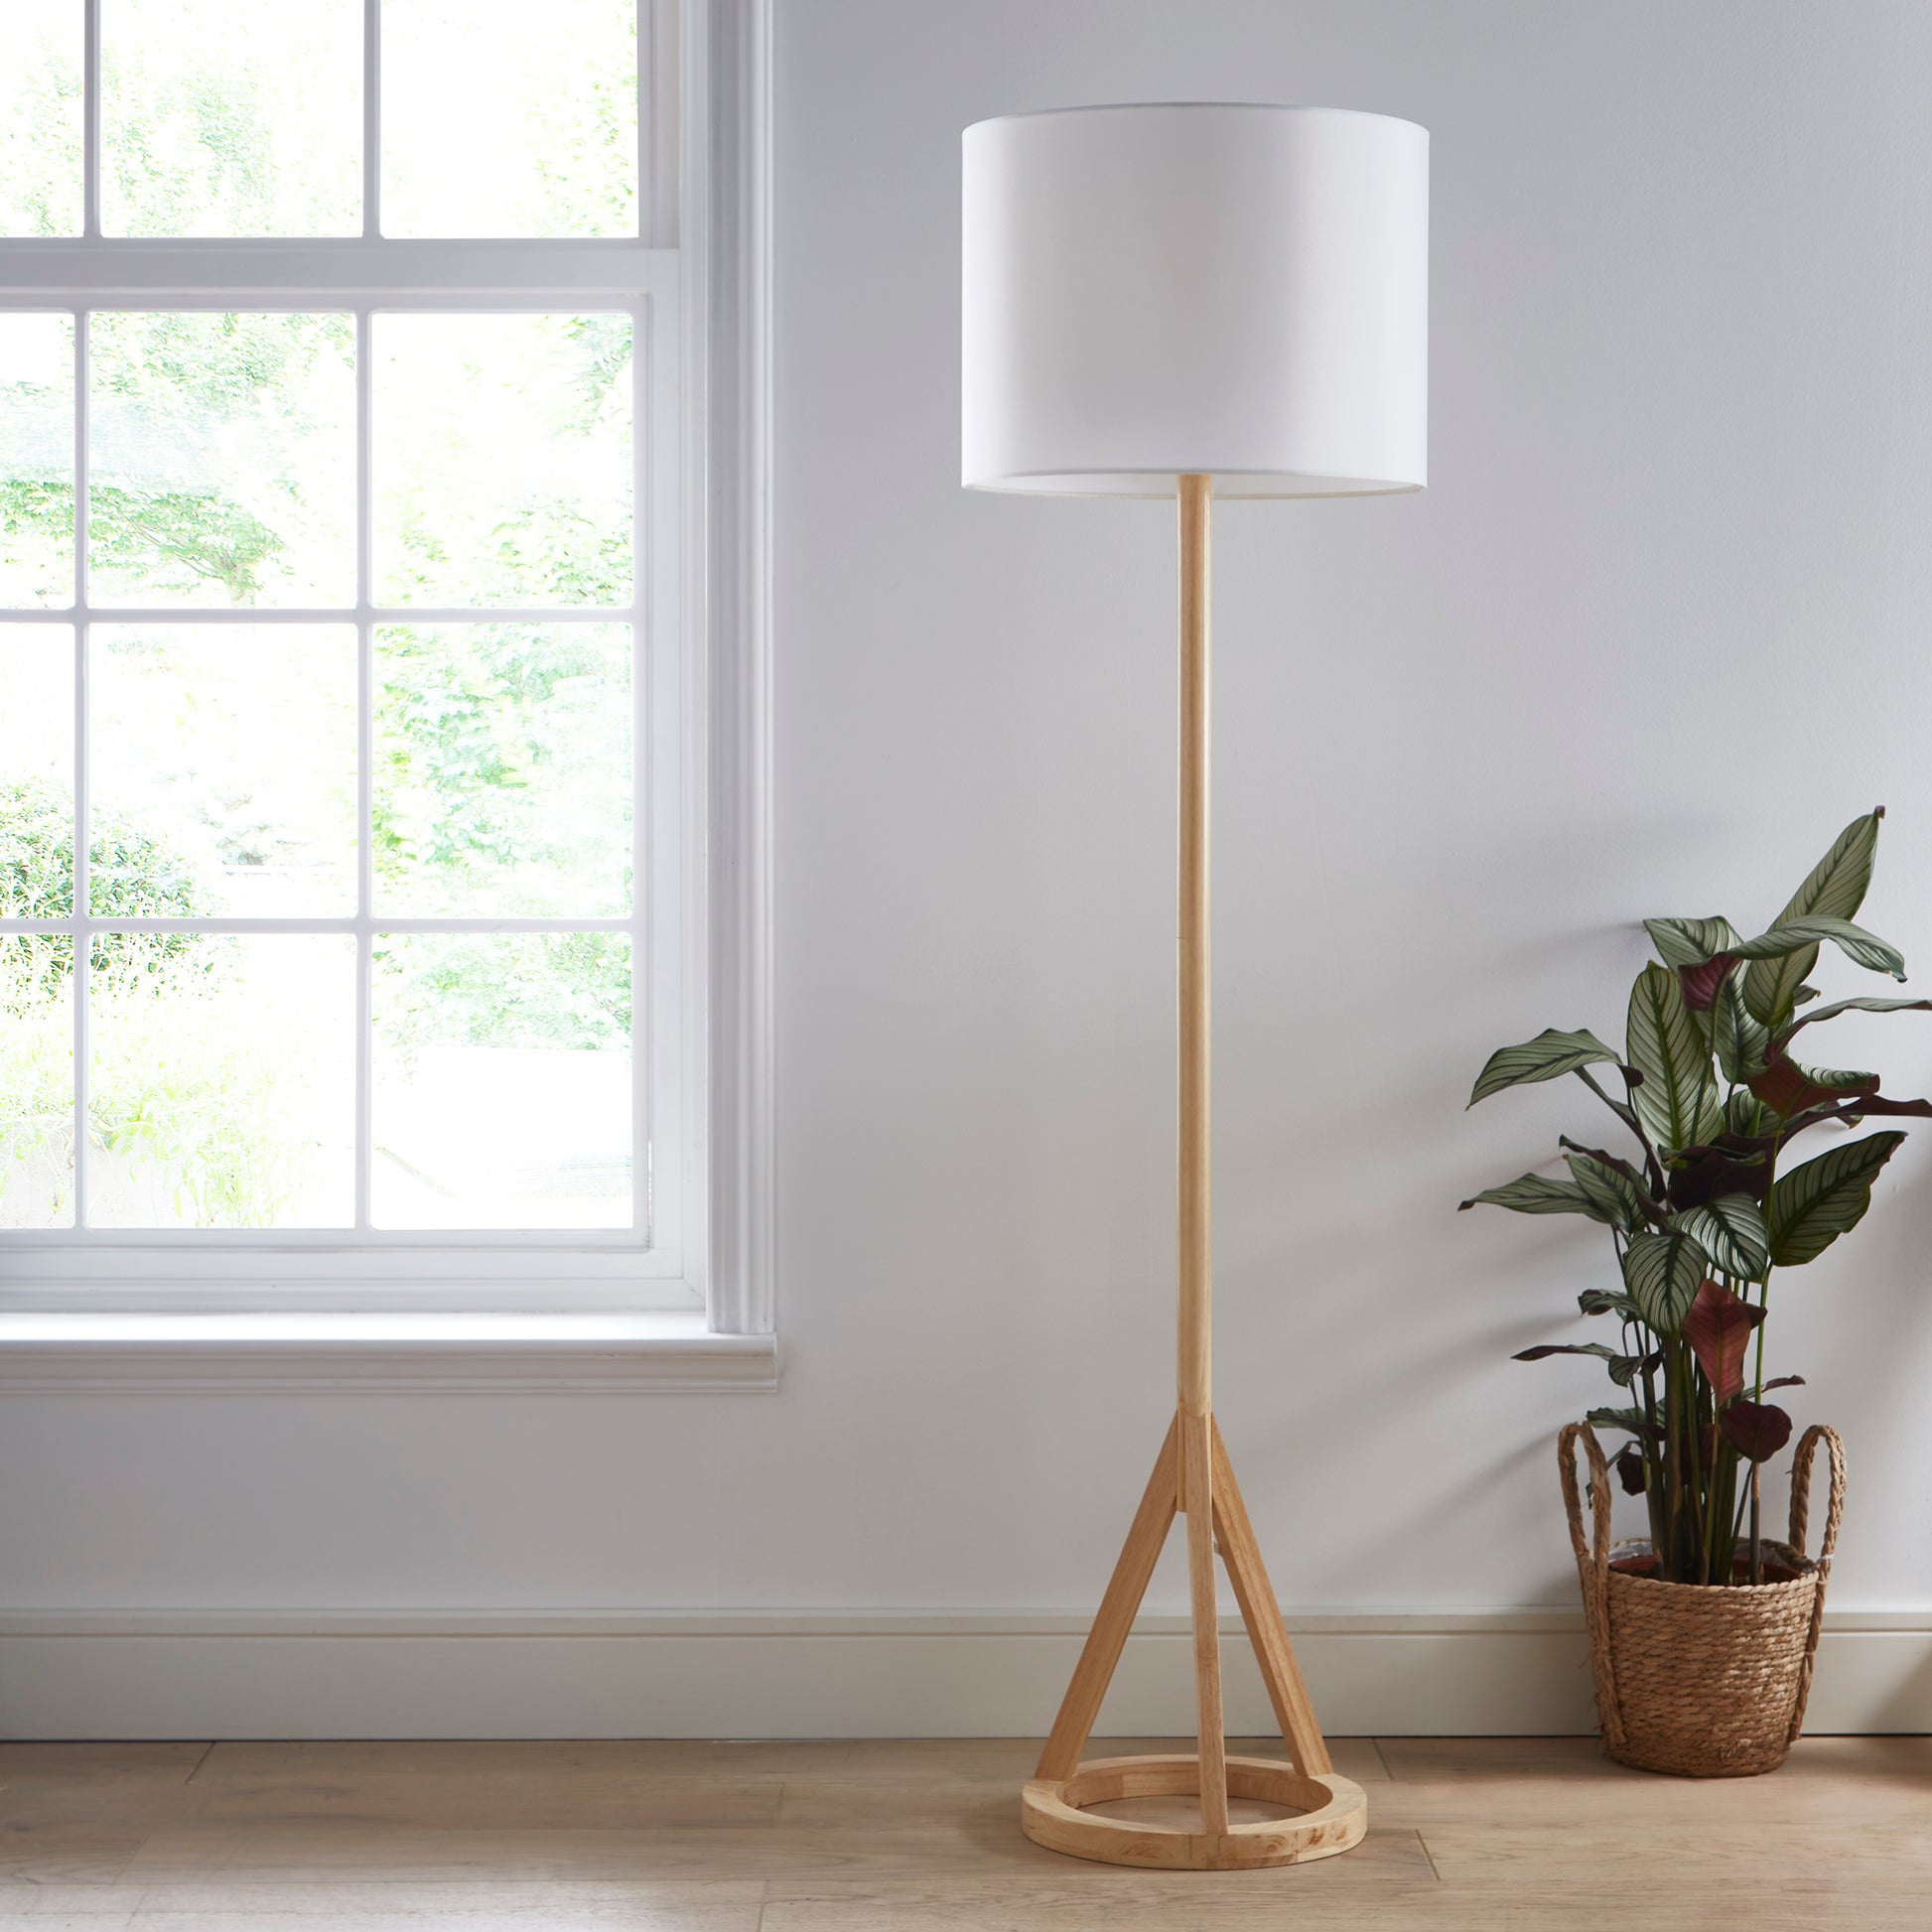 Bishop Natural Wood Base Table Lamp and Matching Floor Lamp (sold separately)